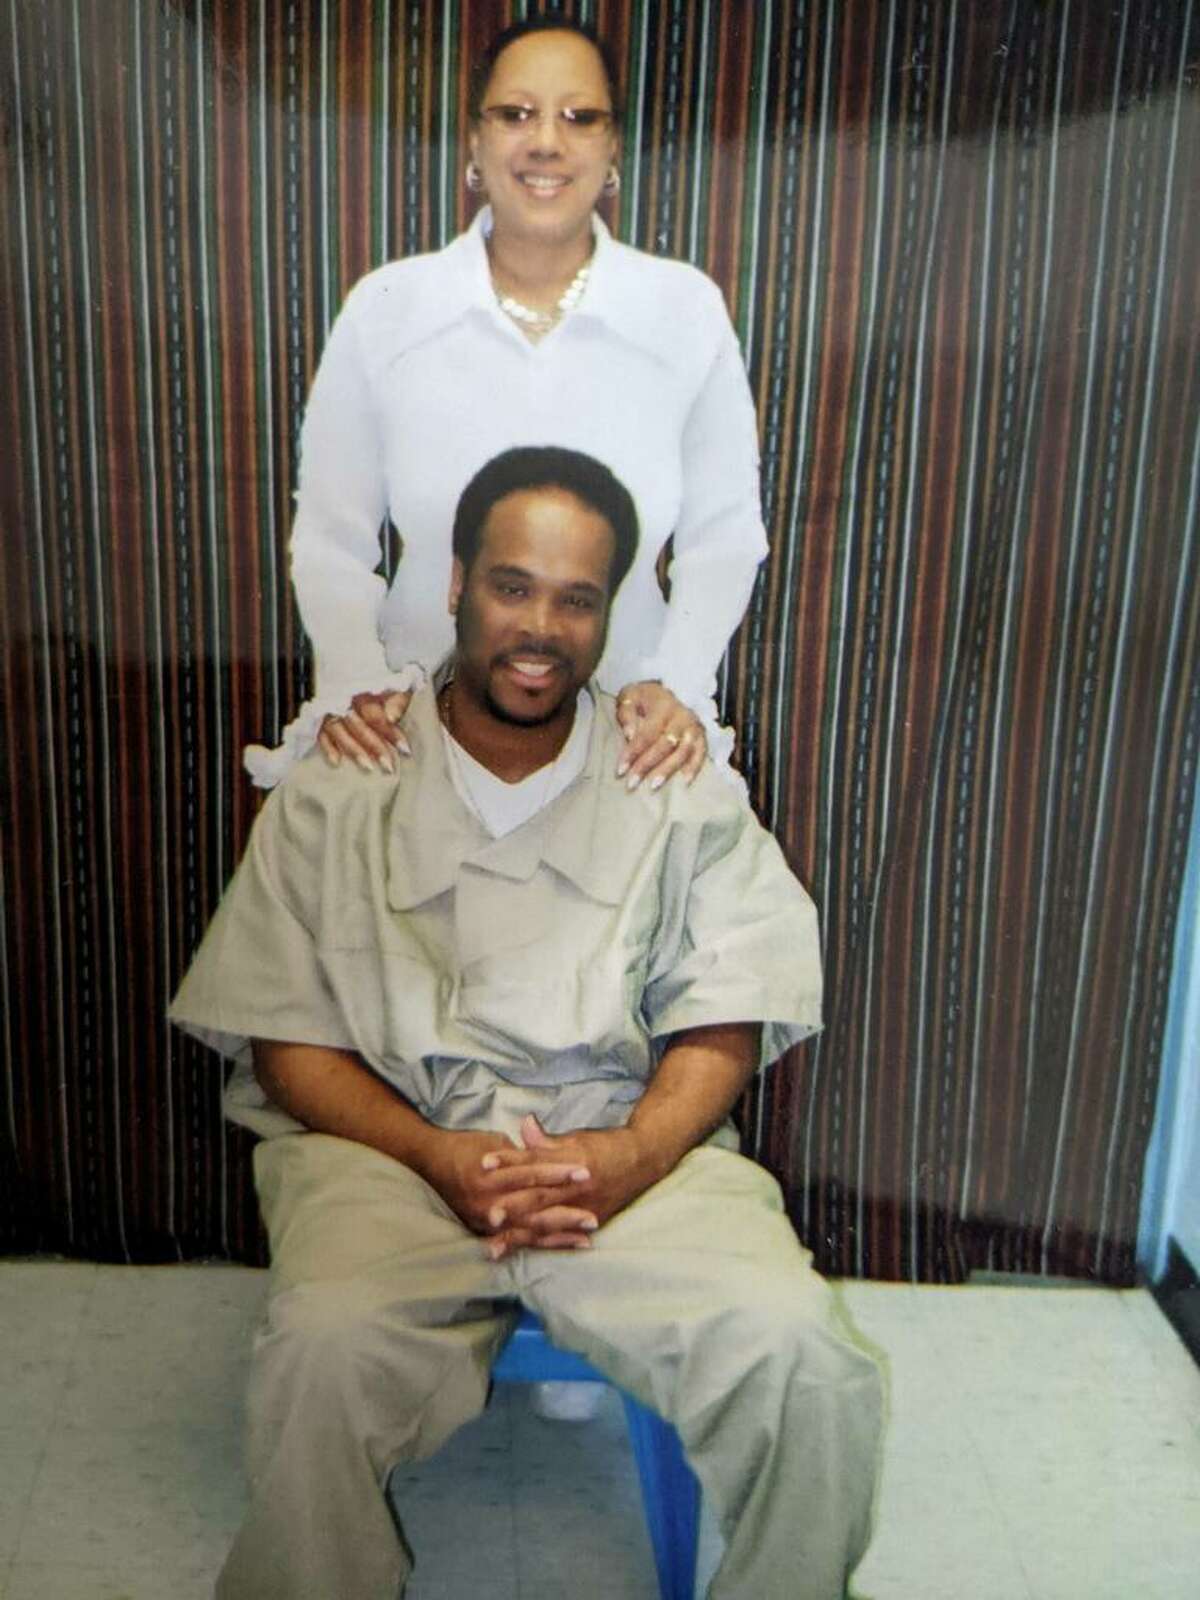 Michael Cox and his mother, Stephanie Hyman, taken while she was visiting him in prison.